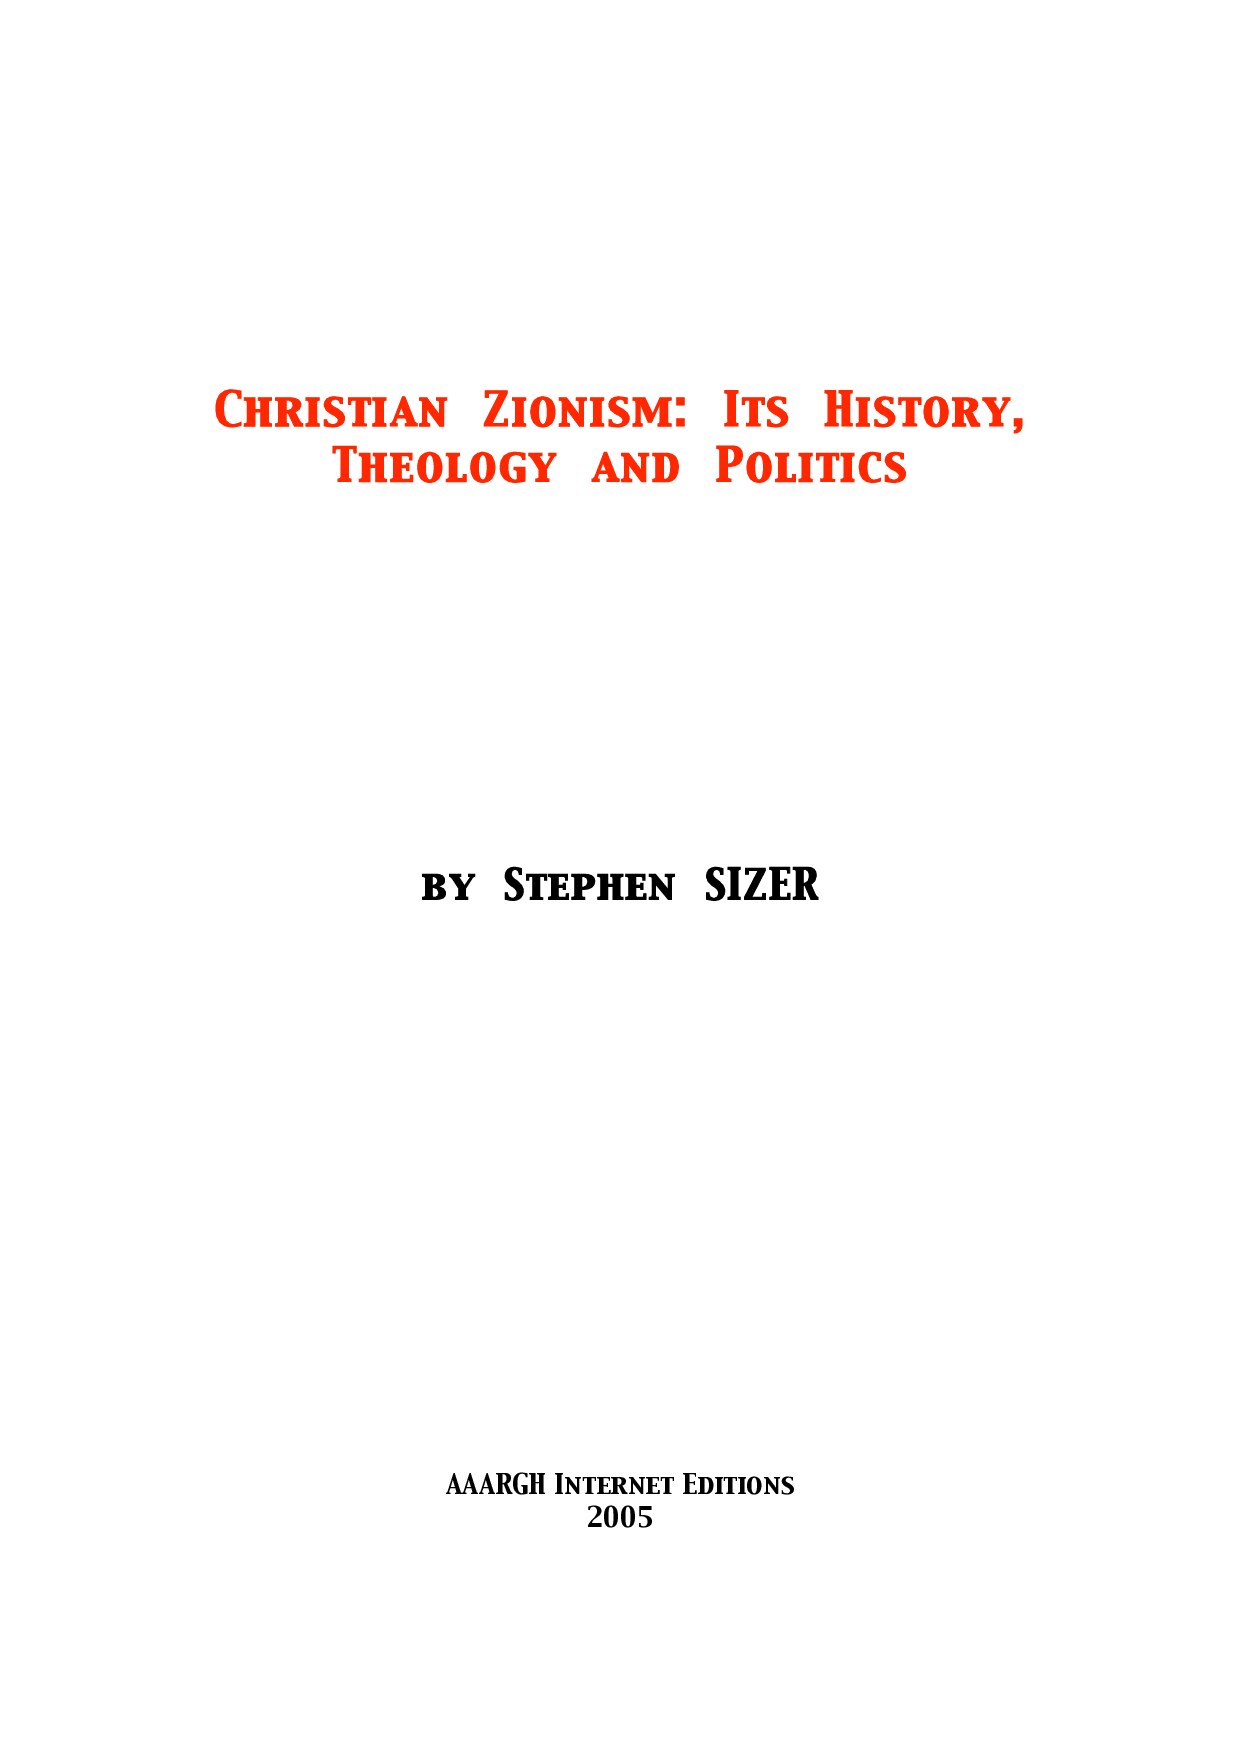 Sizer, Stephen; Christian Zionism - Its History Theology And Politics